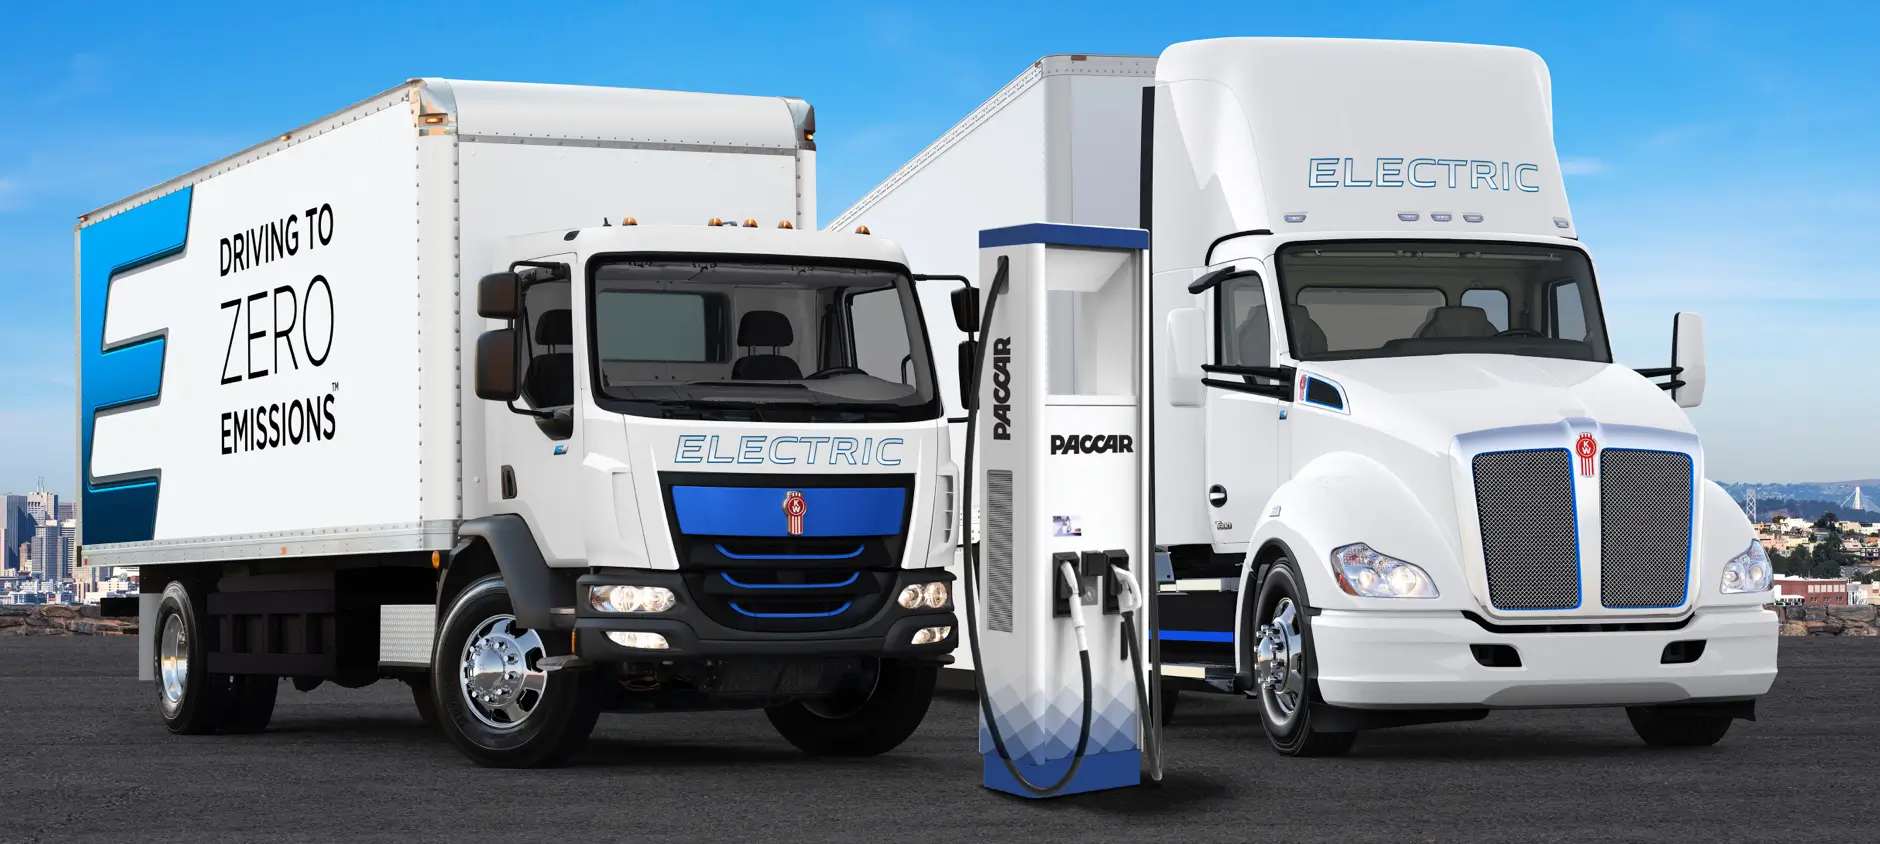 EV Trucks and charging stations